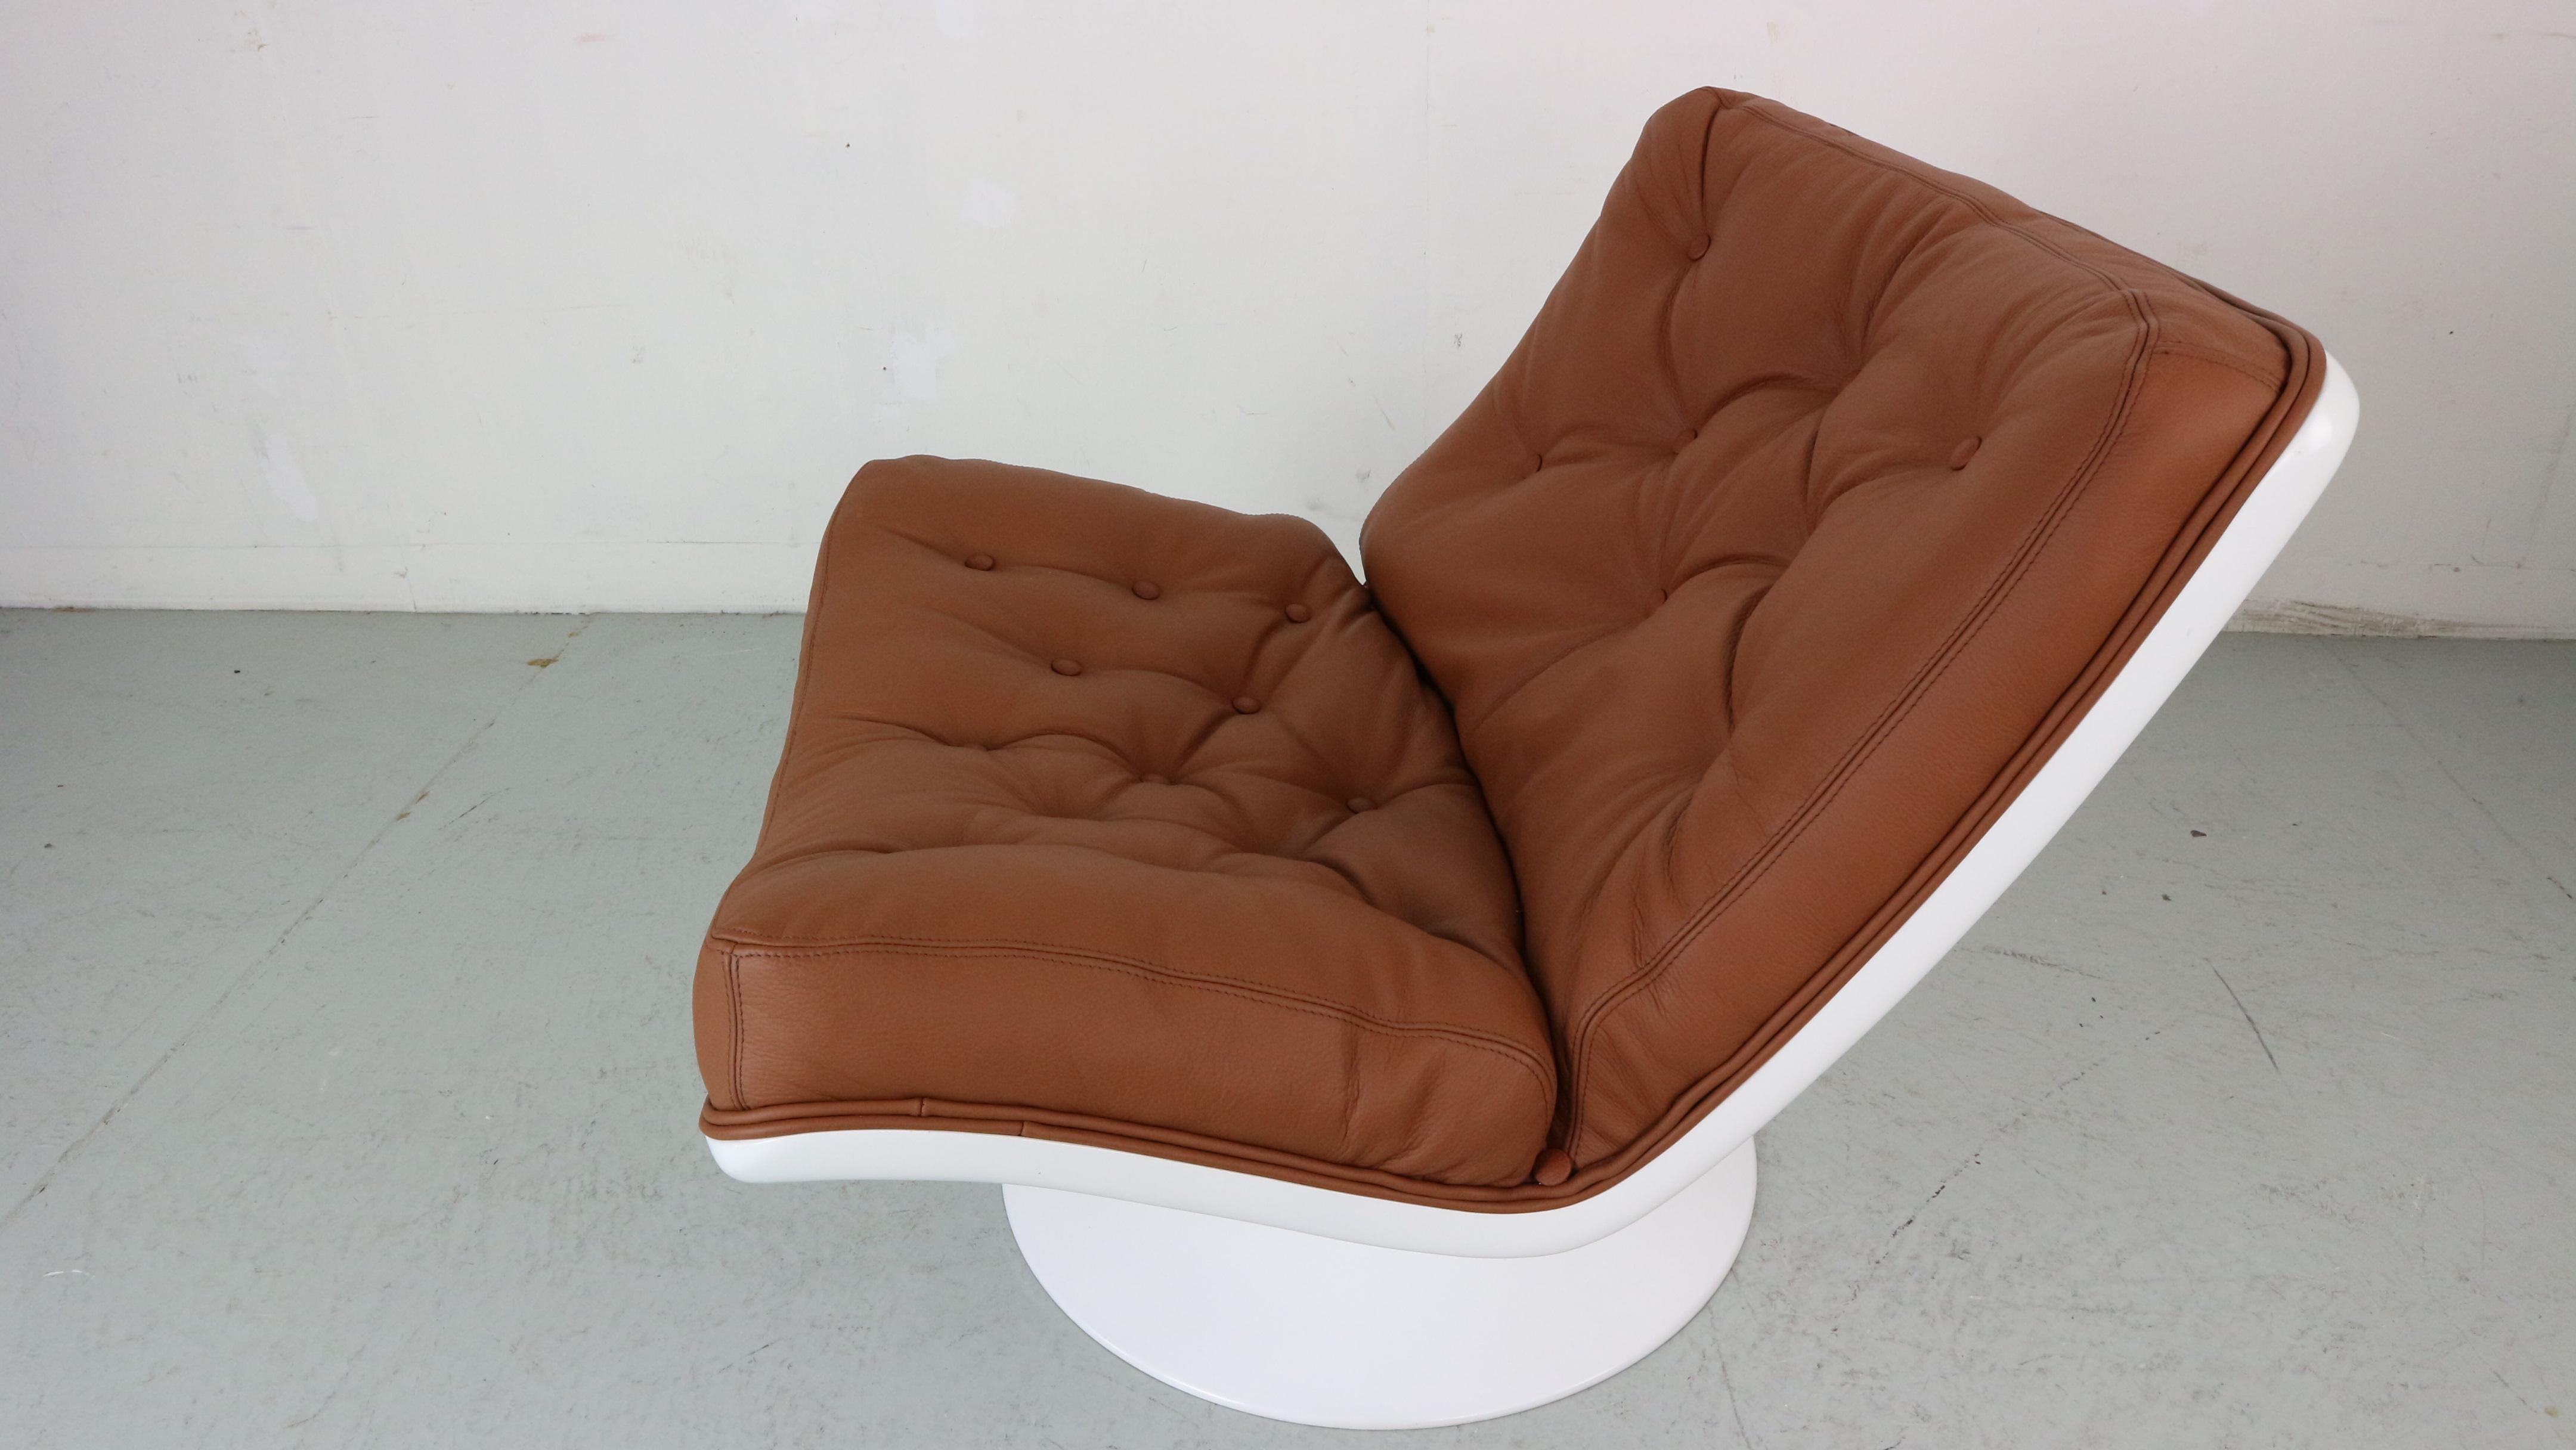 Very decorative chair designed in 1968 by Geoffrey Harcourt for the Dutch company Artifort.

The fiberglass shell (1st edition?) is still in a very good and original condition. There is only a little wear on the base at the floor, with leather